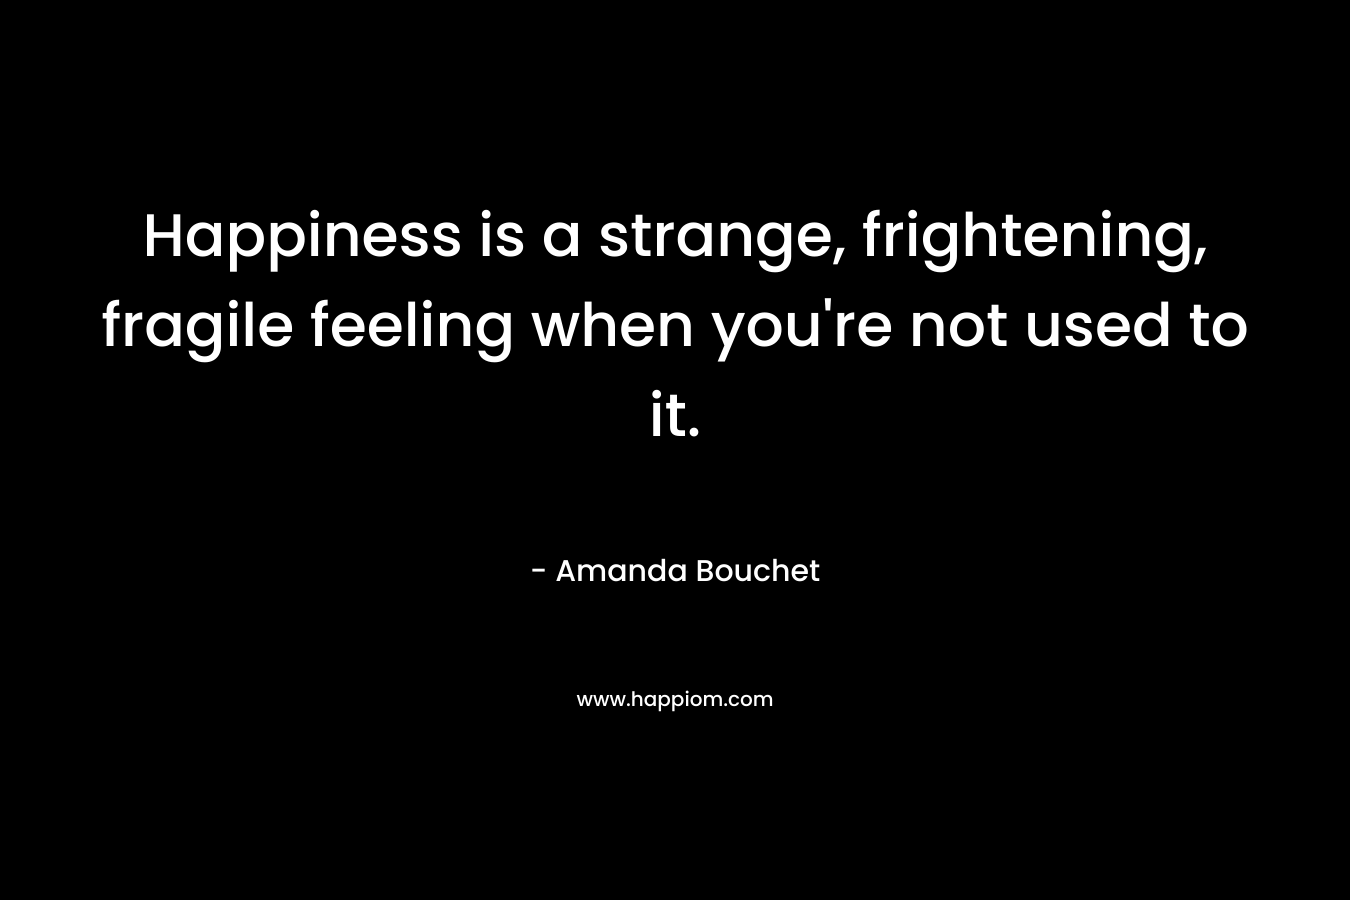 Happiness is a strange, frightening, fragile feeling when you’re not used to it. – Amanda Bouchet